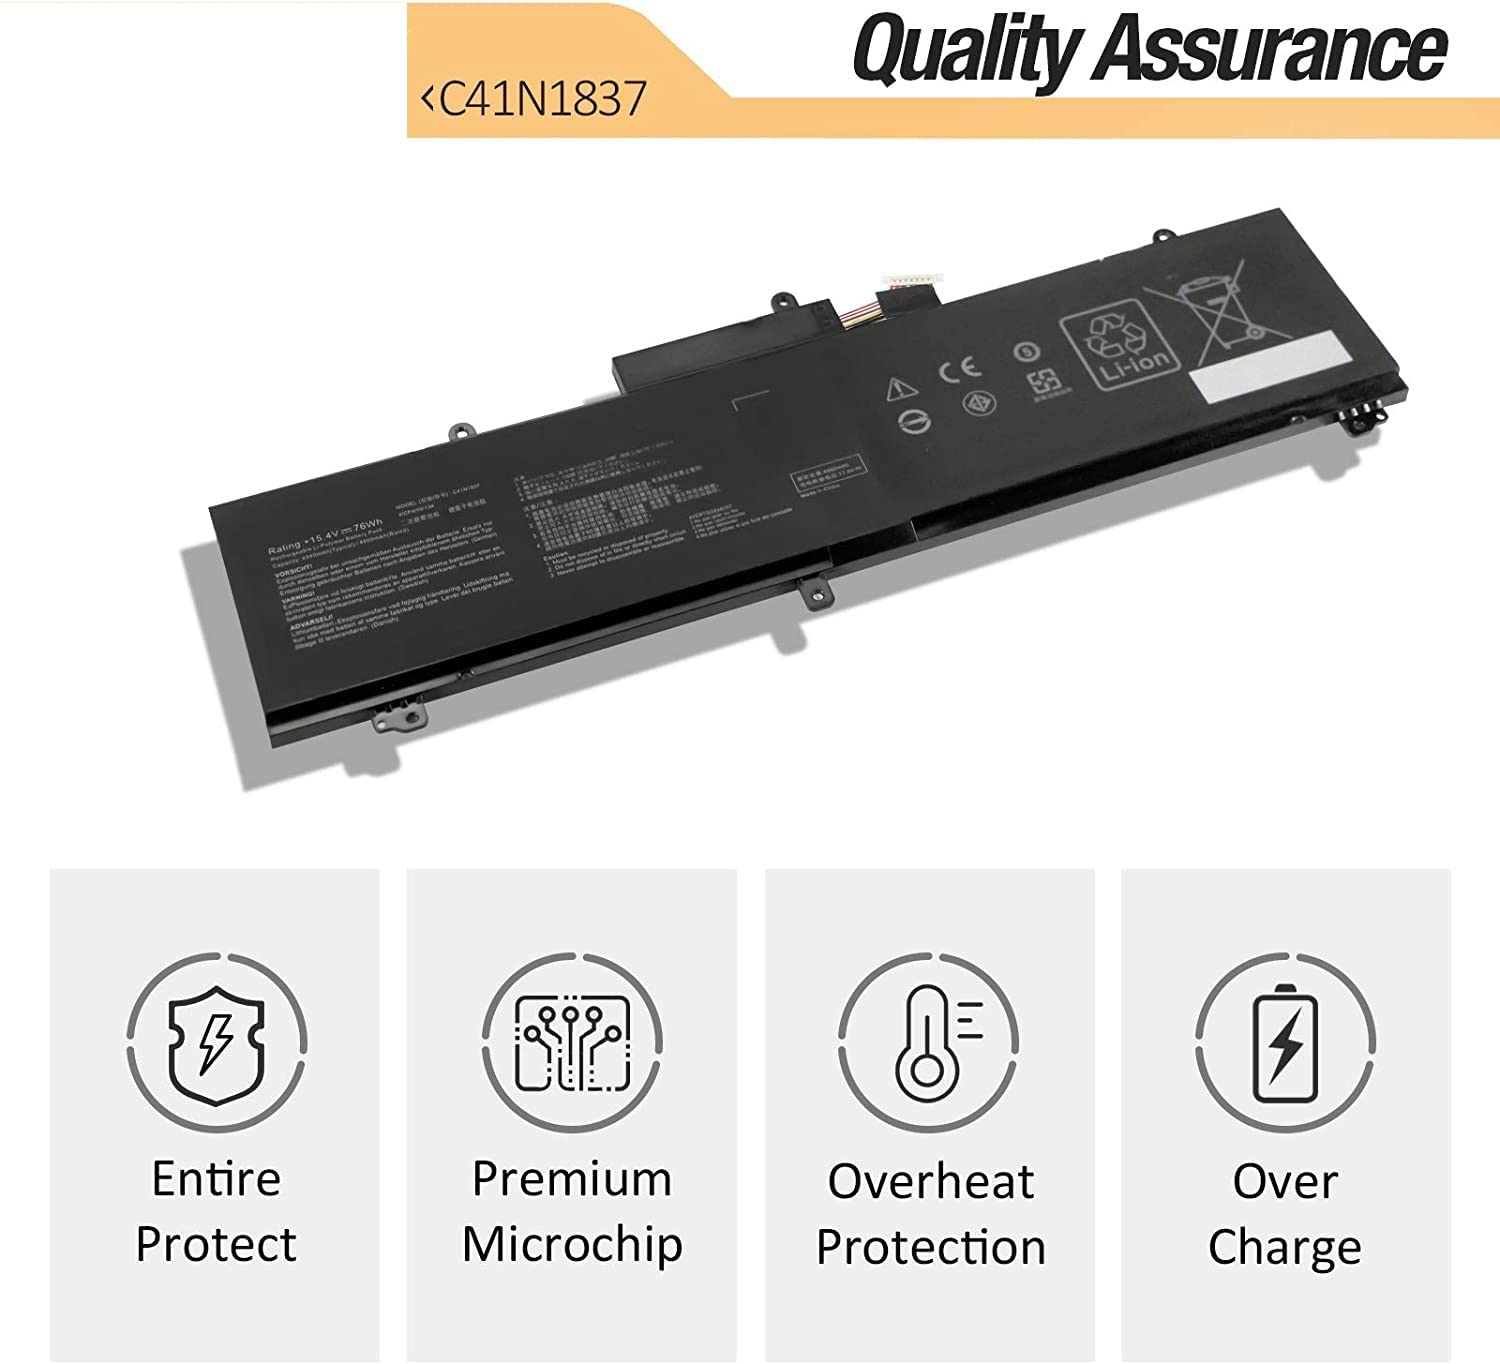 C41N1837 Laptop Battery Replacement for ASUS ROG Zephyrus GA502 GA502D GA502DU GA502GU GA502IV GU502 GU502DU GU502GV GU502LU GU502LW GU502LV GX502LXS GX502GV GX502GW GU532 GX532 GX532GV GX532GW